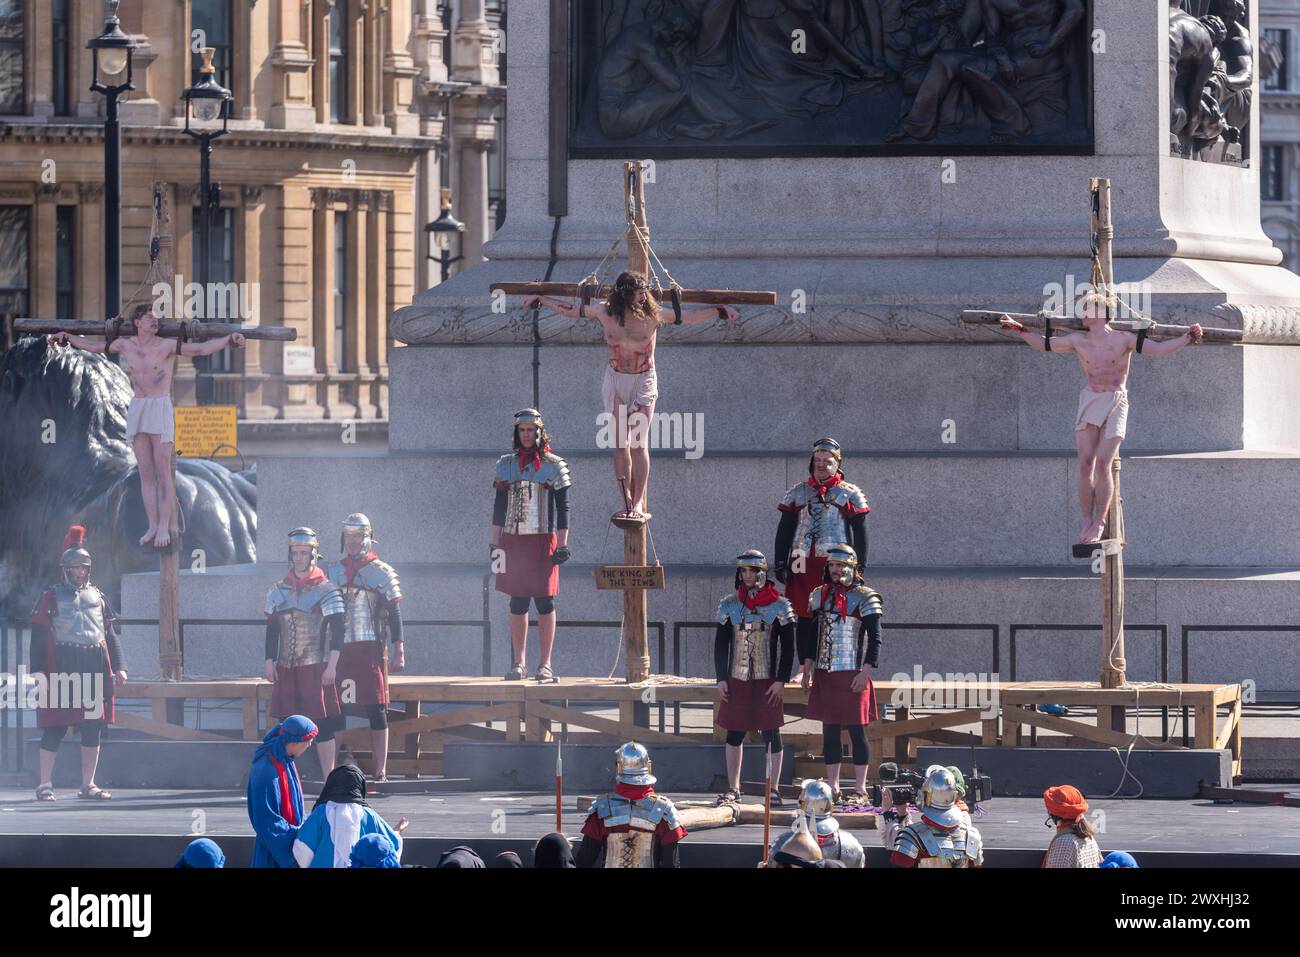 The Passion of Christ open air play by Wintershall in Trafalgar Square, London, on Easter Good Friday. Jesus and thieves on crosses, crucifixion Stock Photo